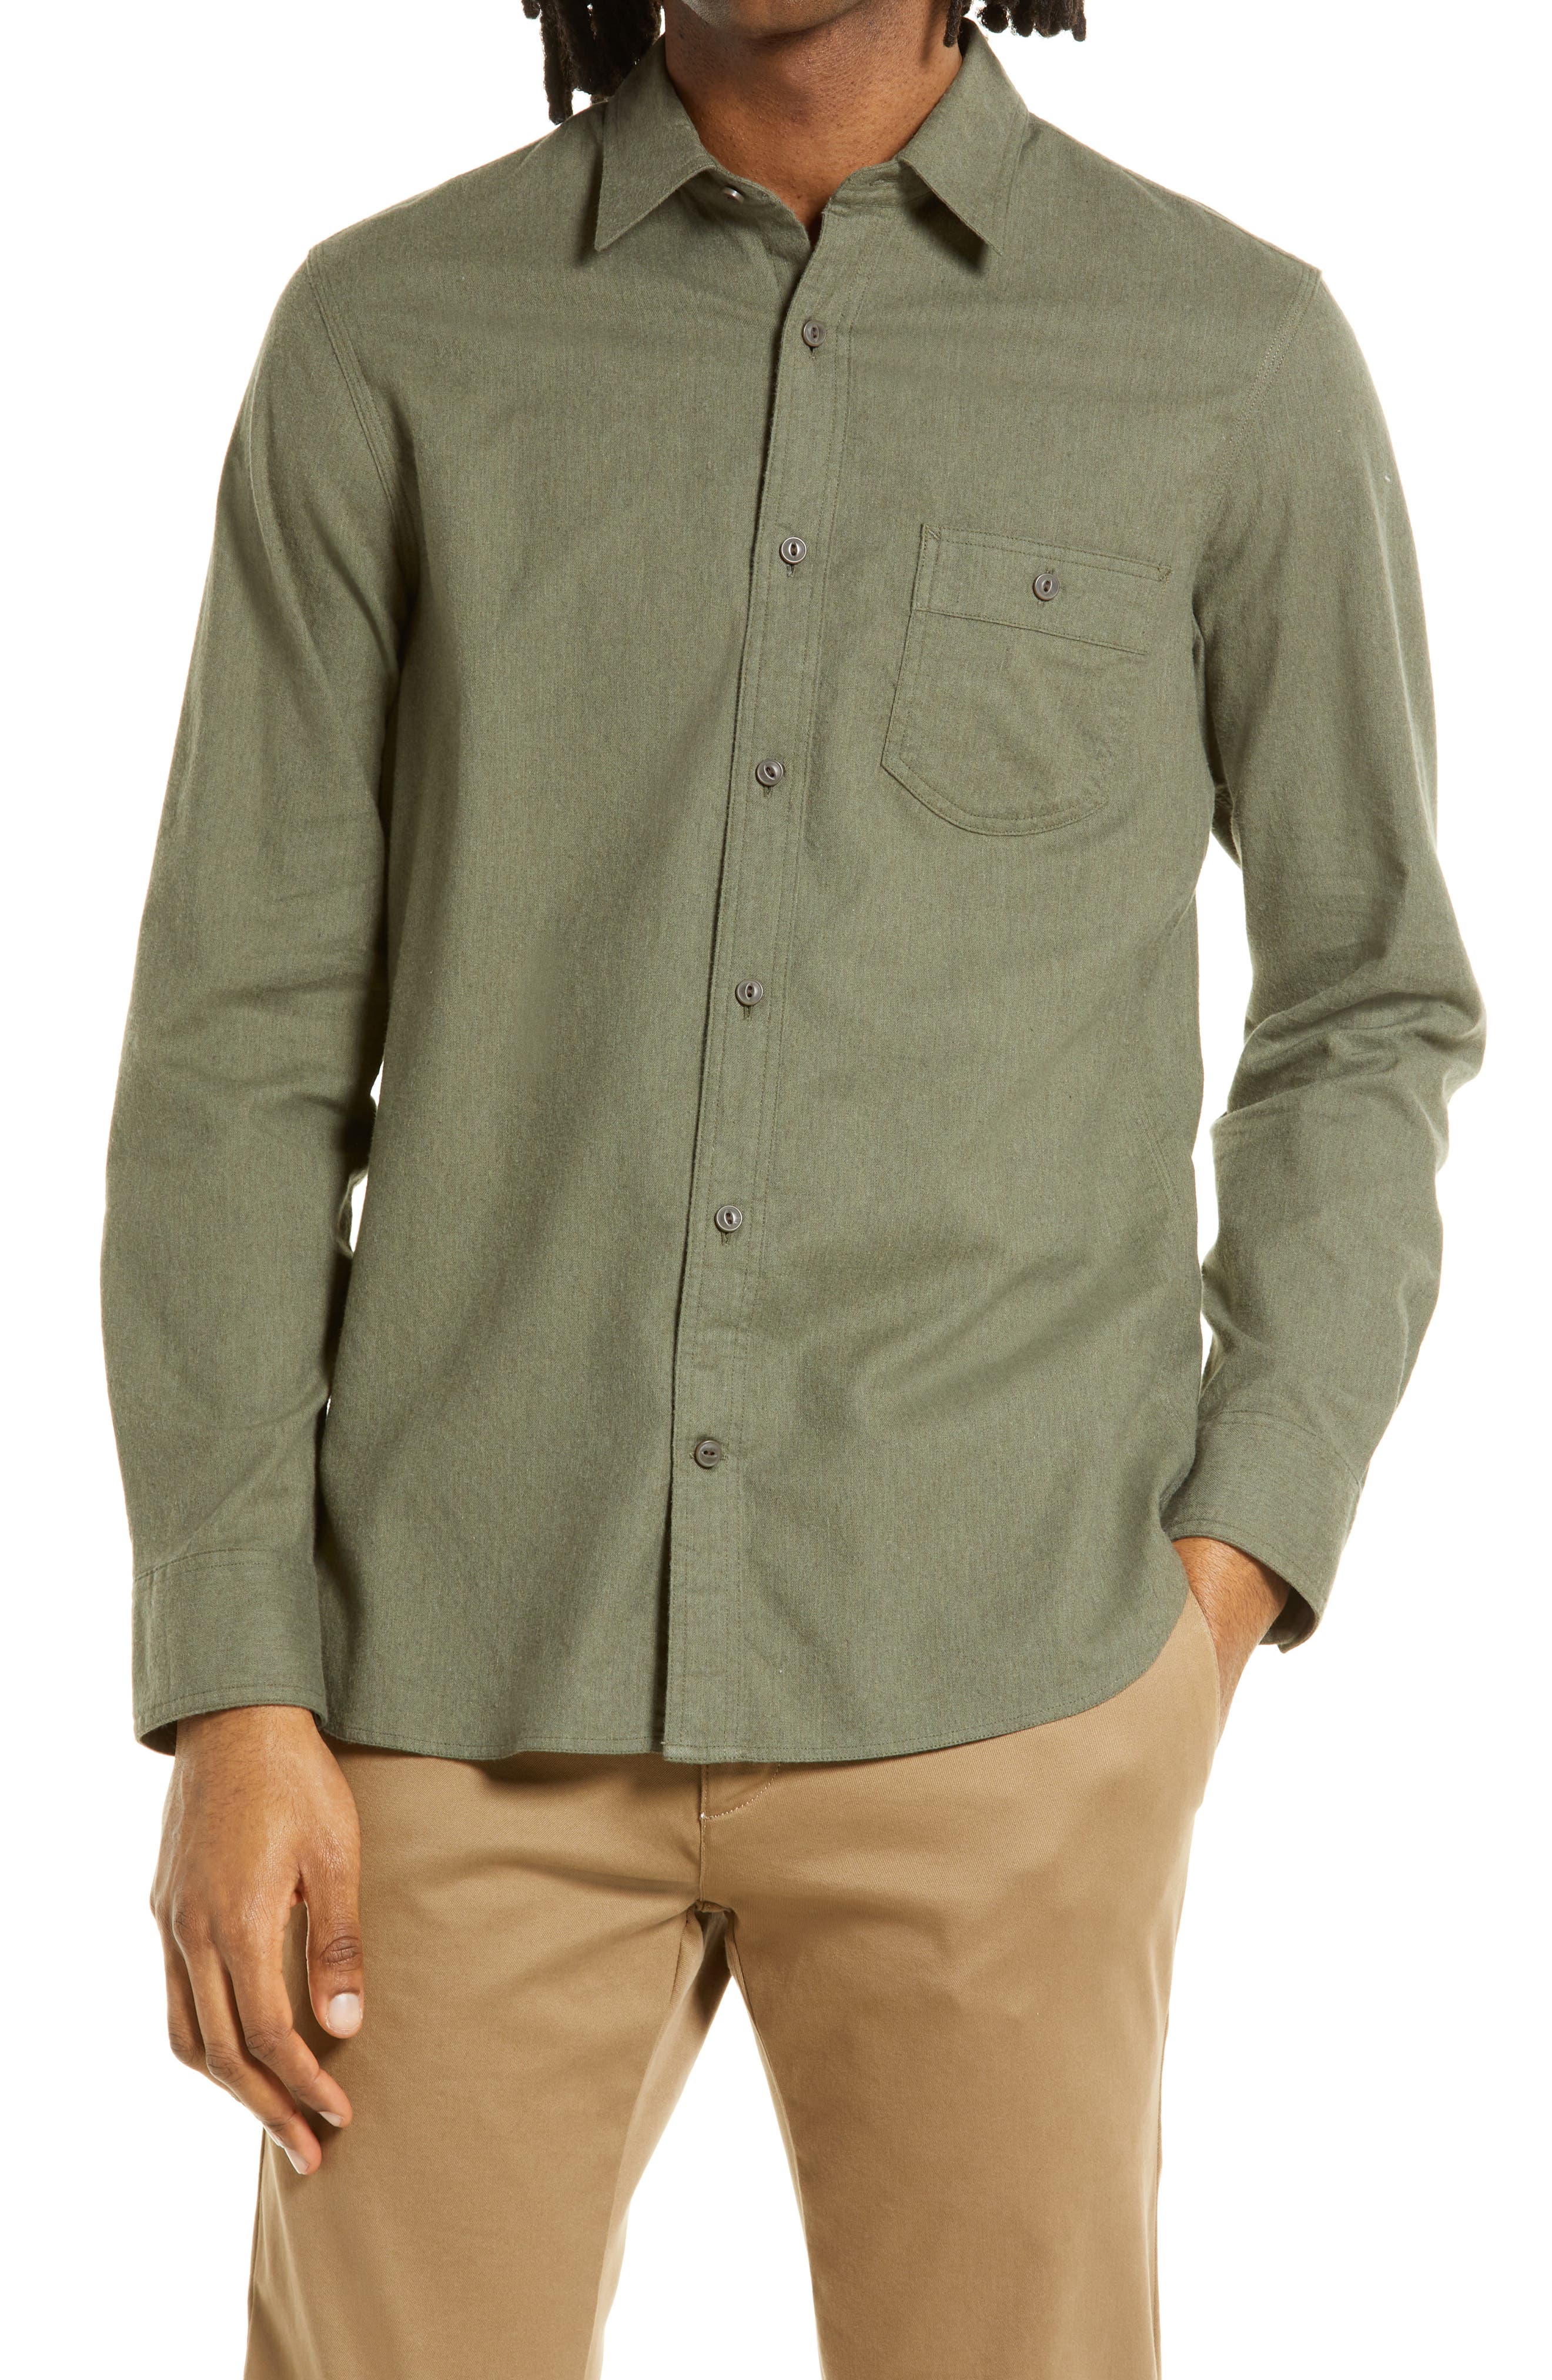 Mens Classic Long Sleeve Button-Down Plaid Cotton Shirt Outdoor Wear Color : Medium, Size : Army Green 